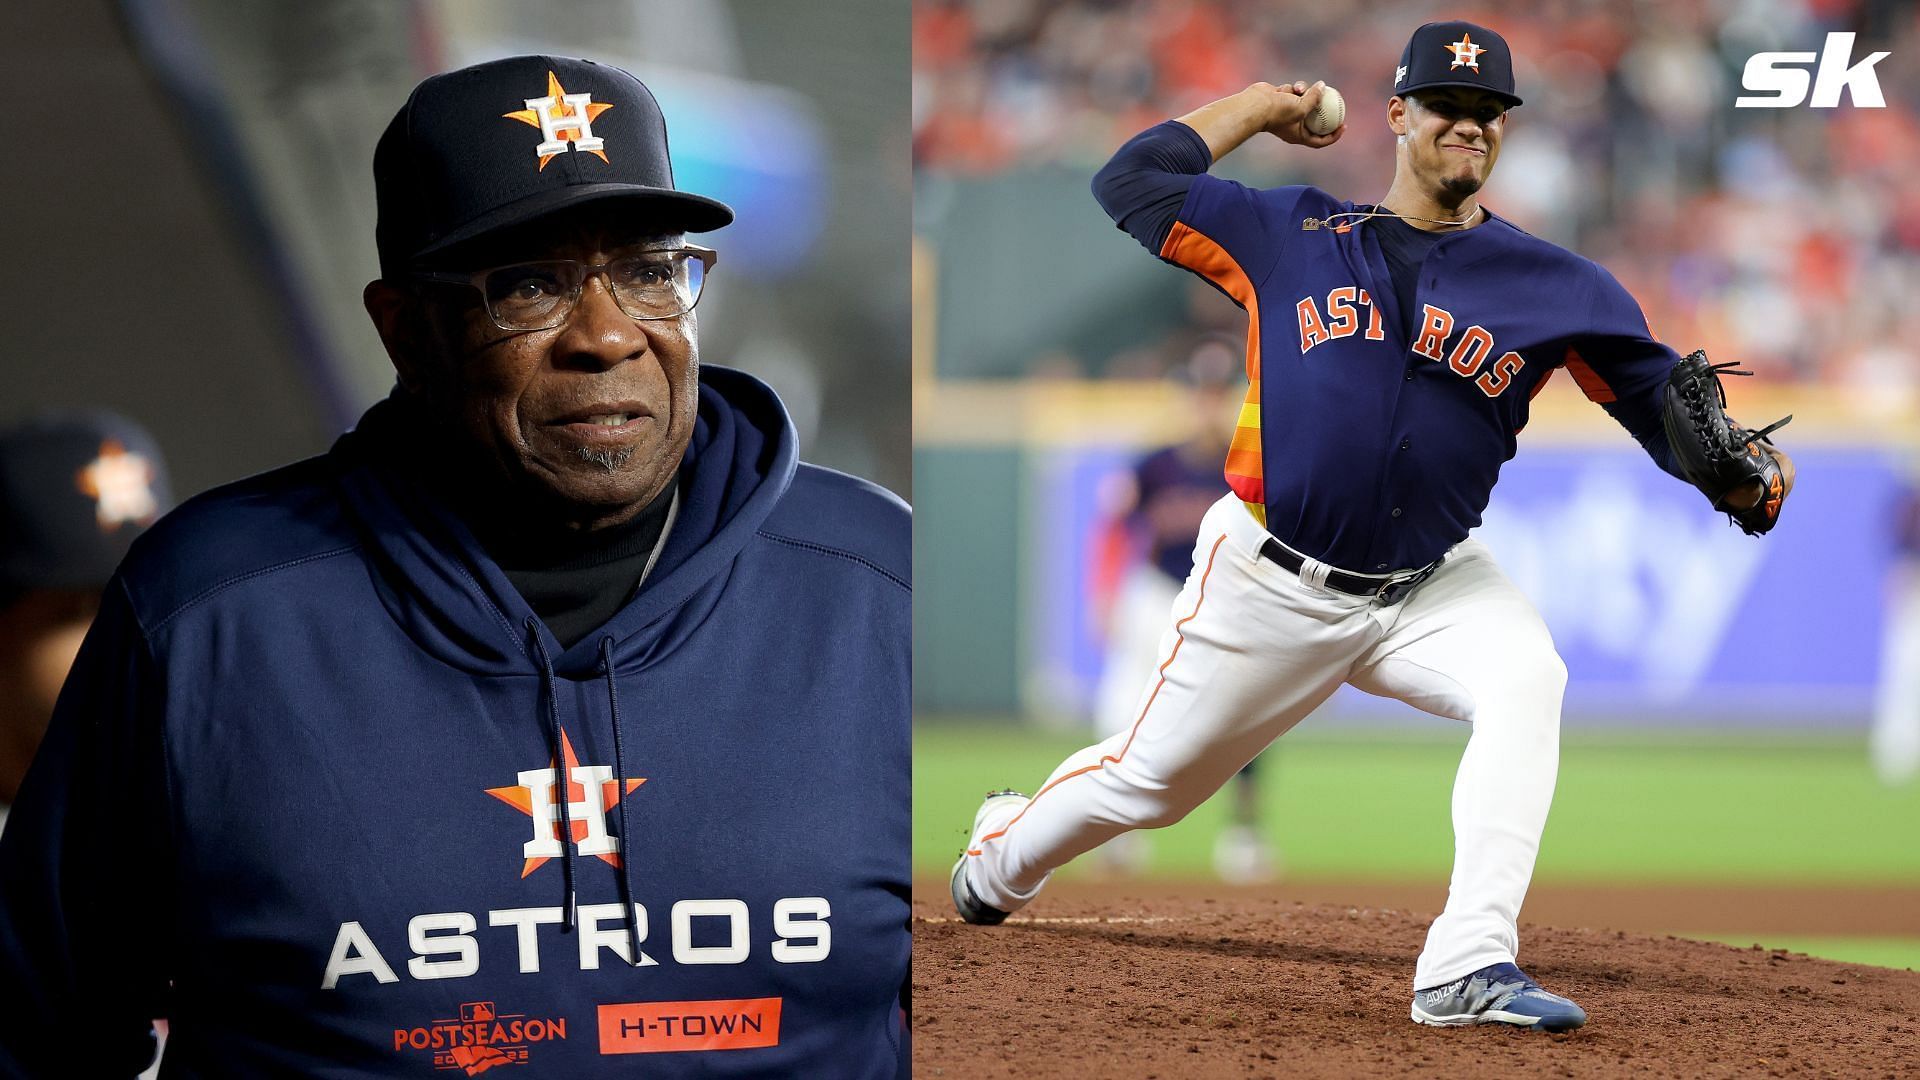 Astros manager Dusty Baker has given his take on the Bryan Abreu appeal